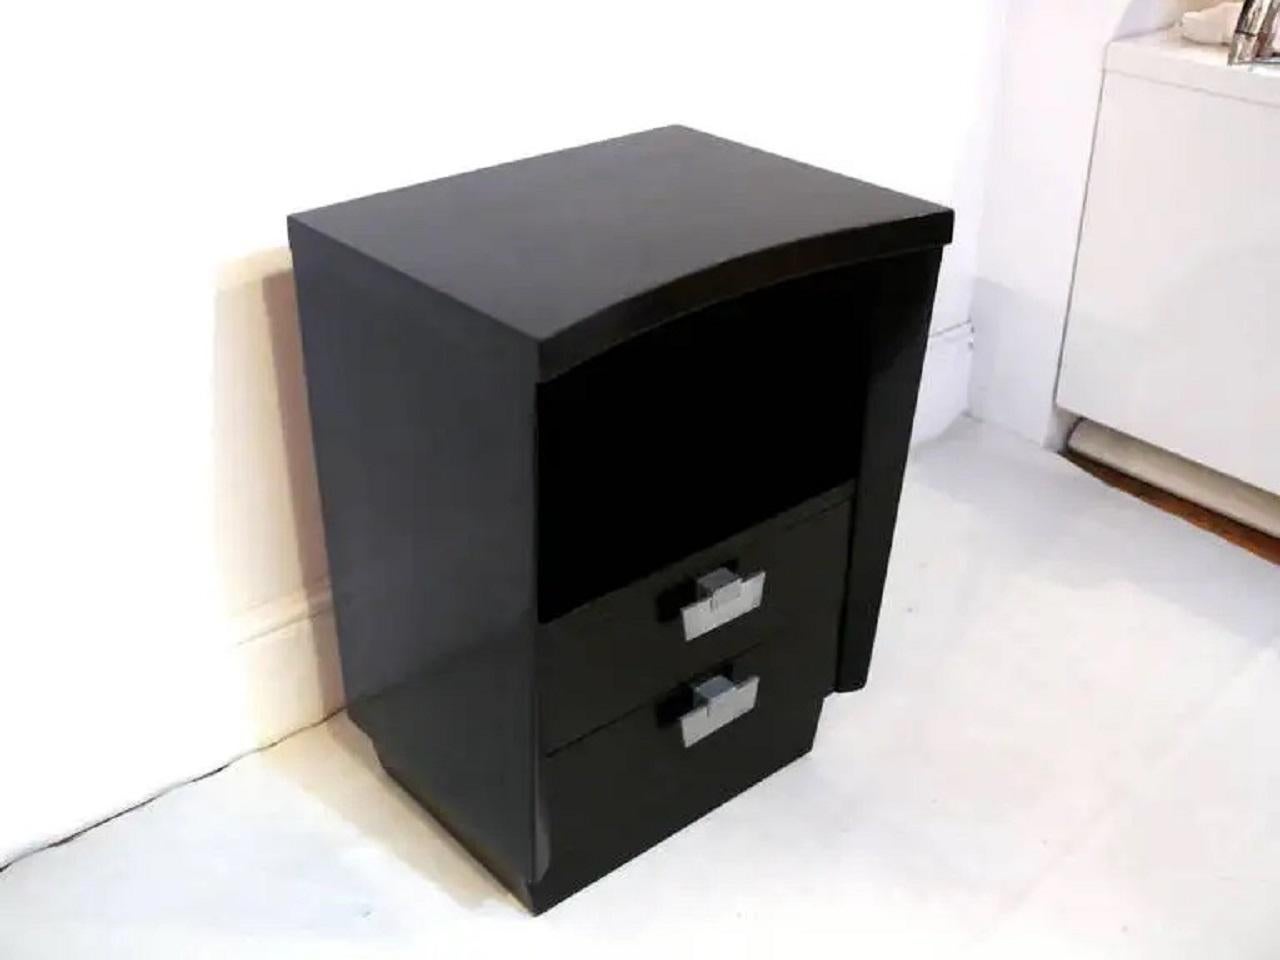 American of Martinsville midcentury ebonized curved front nightstand, side or end table with two drawers and open cubby resting on a floating base. This nightstand is sturdy, eye-catching, and ready to be used for years to come. Overall good